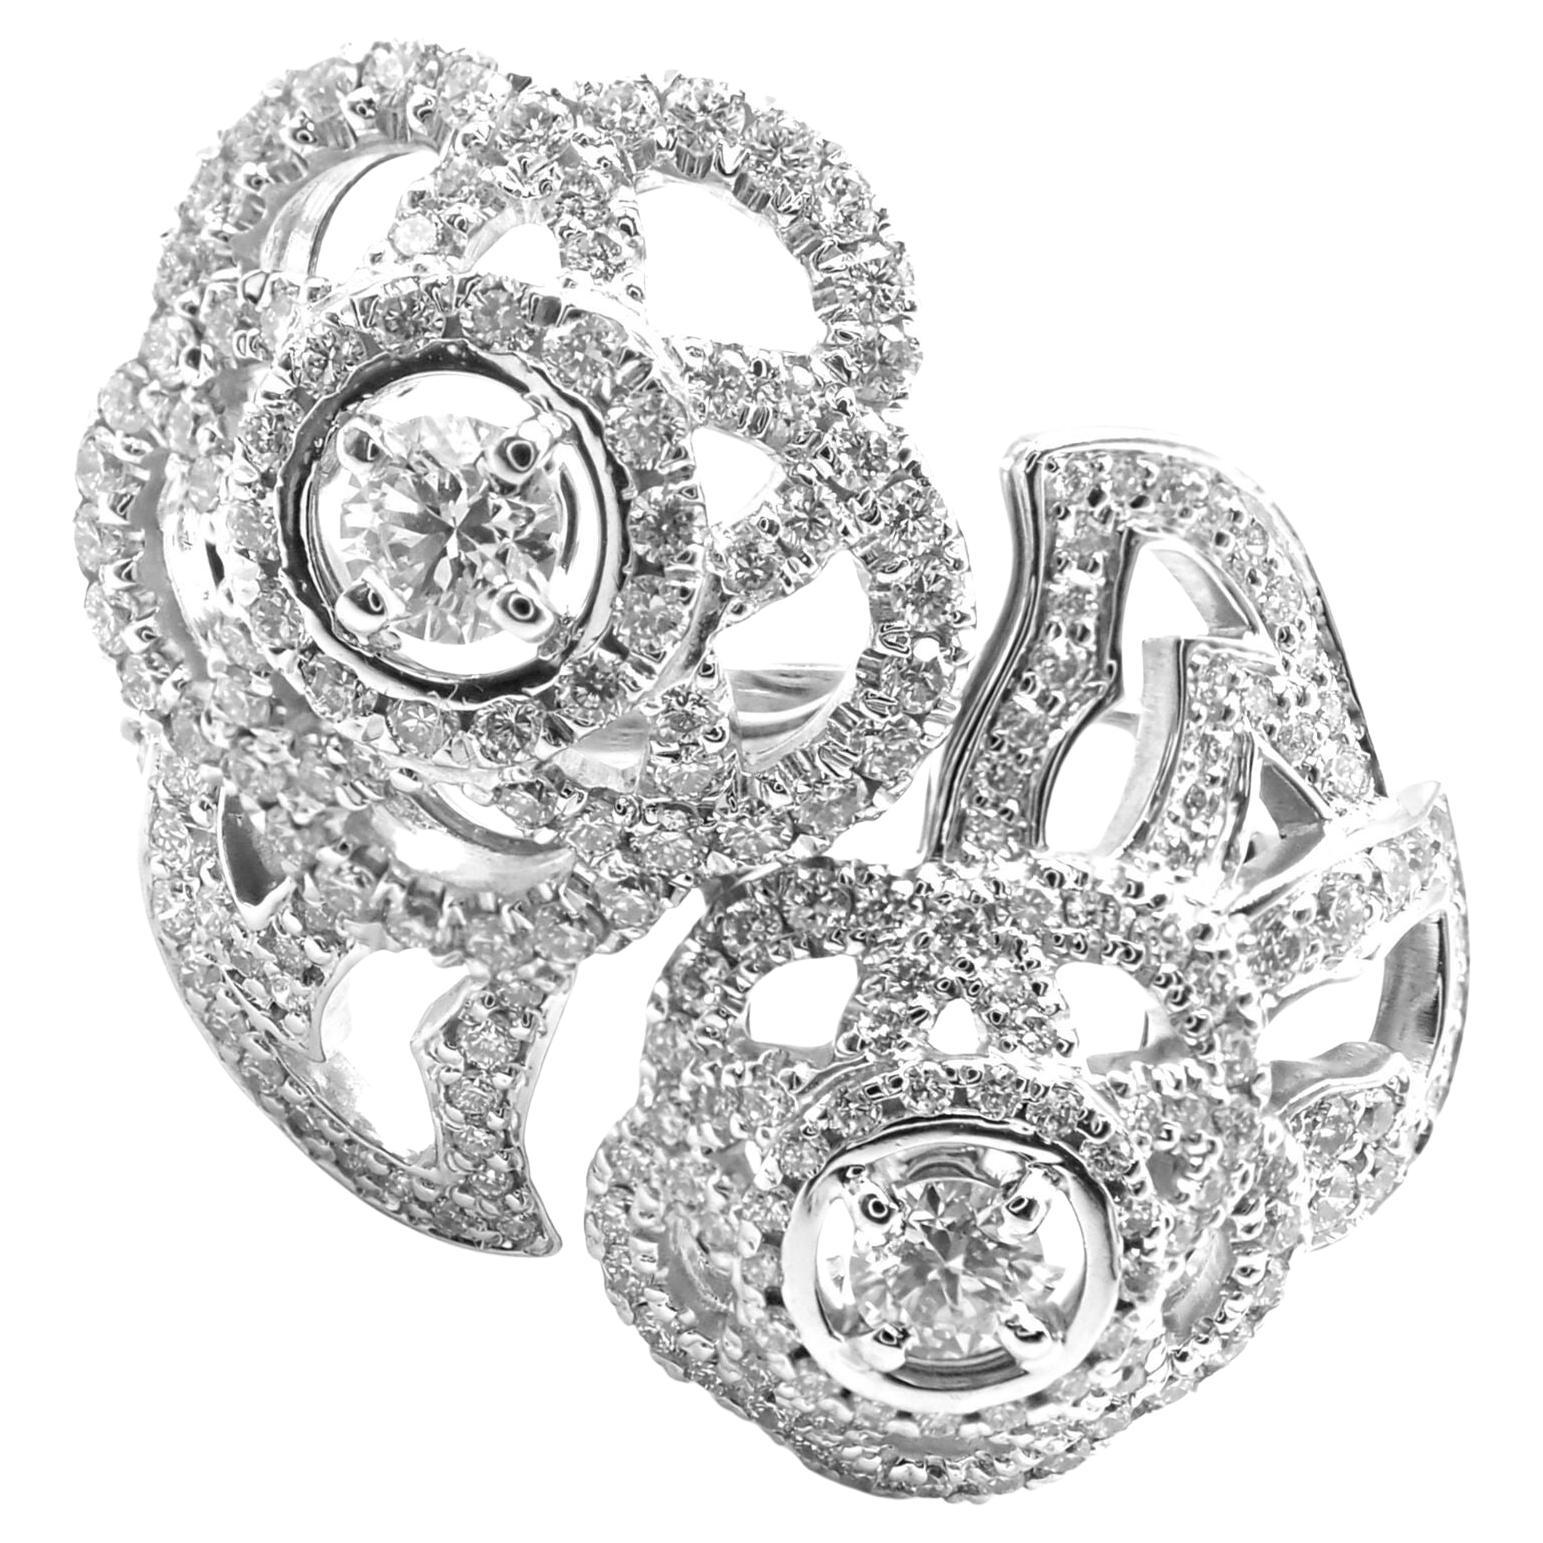 Chanel Diamond Camellia Ring - 3 For Sale on 1stDibs